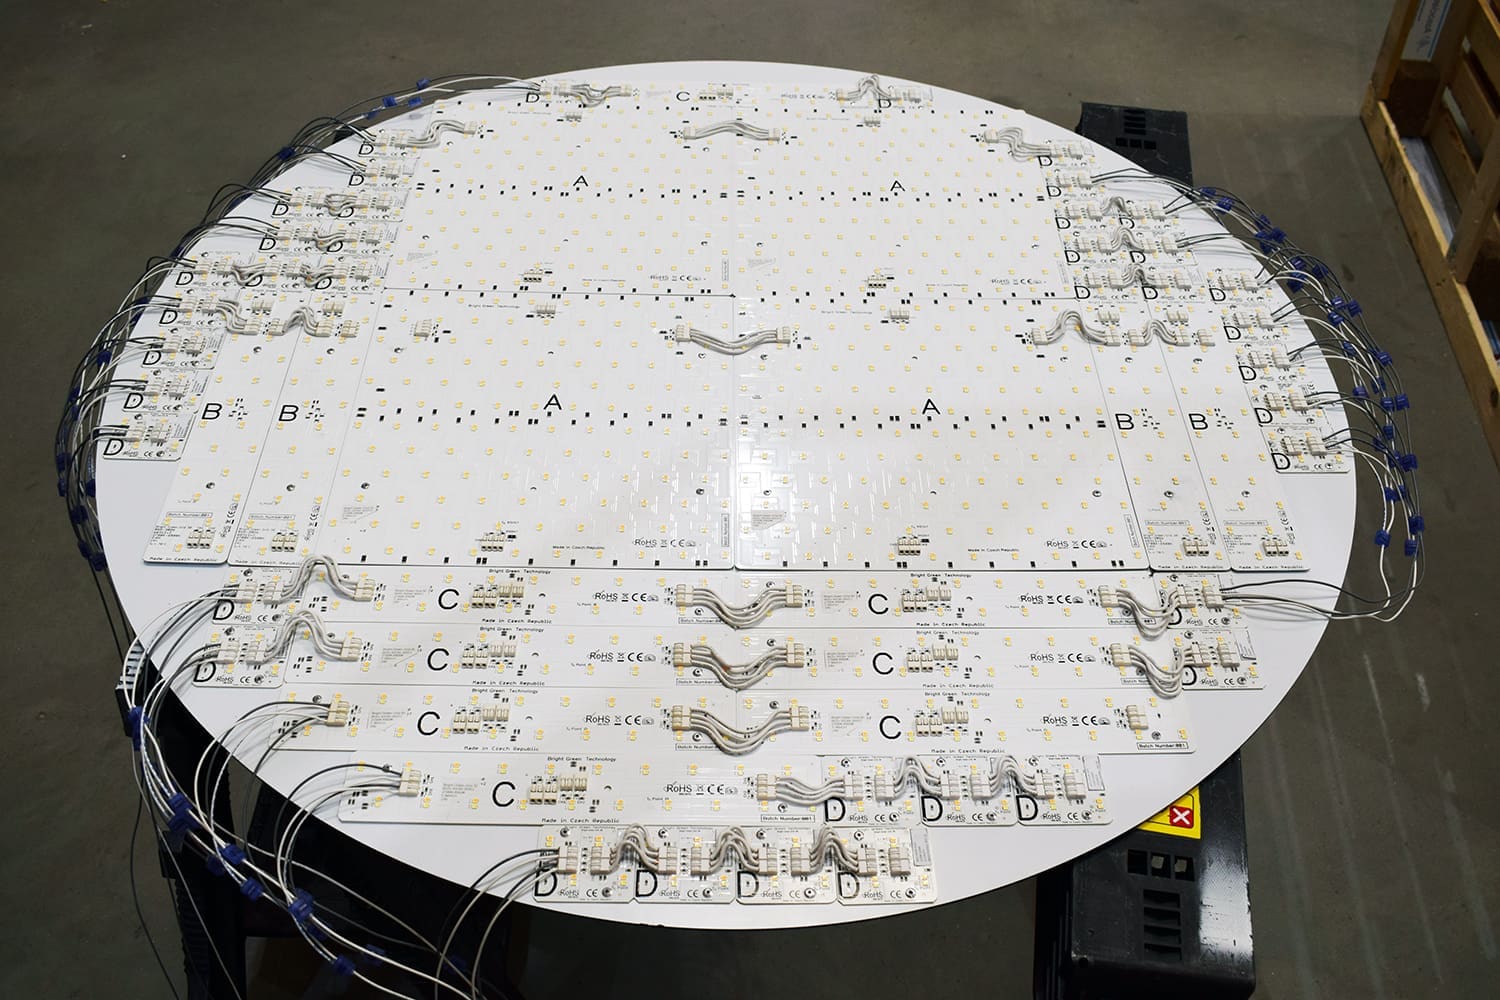 A large, round circuit board mounted on a table. It is populated with numerous LED lights and interconnected wiring. The board has labeled sections marked 'A', 'B', 'C', and 'D', and the setup appears to be part of an electronic assembly or testing process.